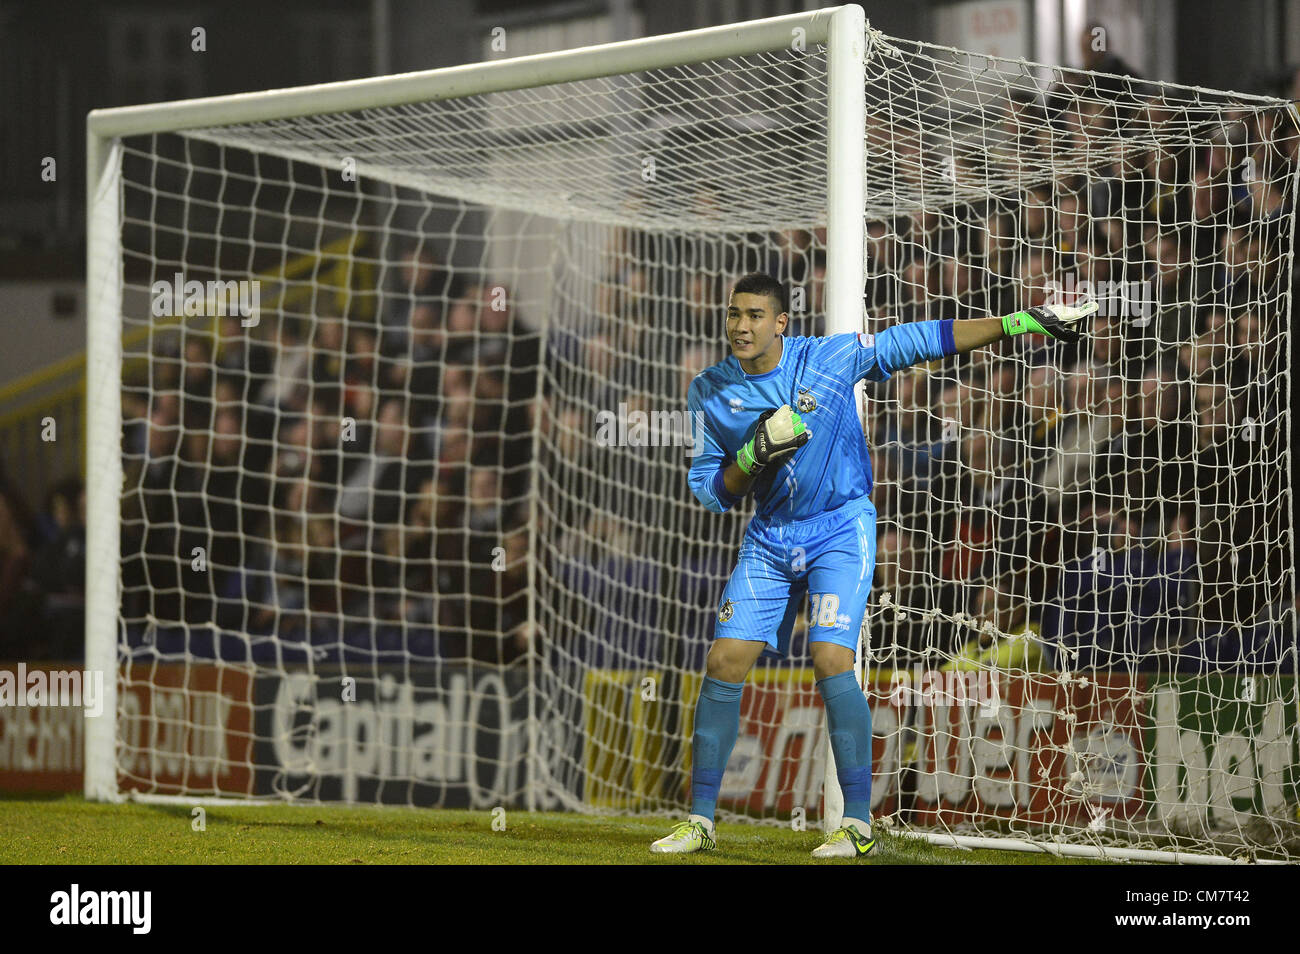 23.10.2012 Wimbledon, England. Neil Etheridge of Bristol Rovers in action during the League Two game between AFC Wimbledon and Bristol Rovers from the Kingsmeadow Stadium. Stock Photo